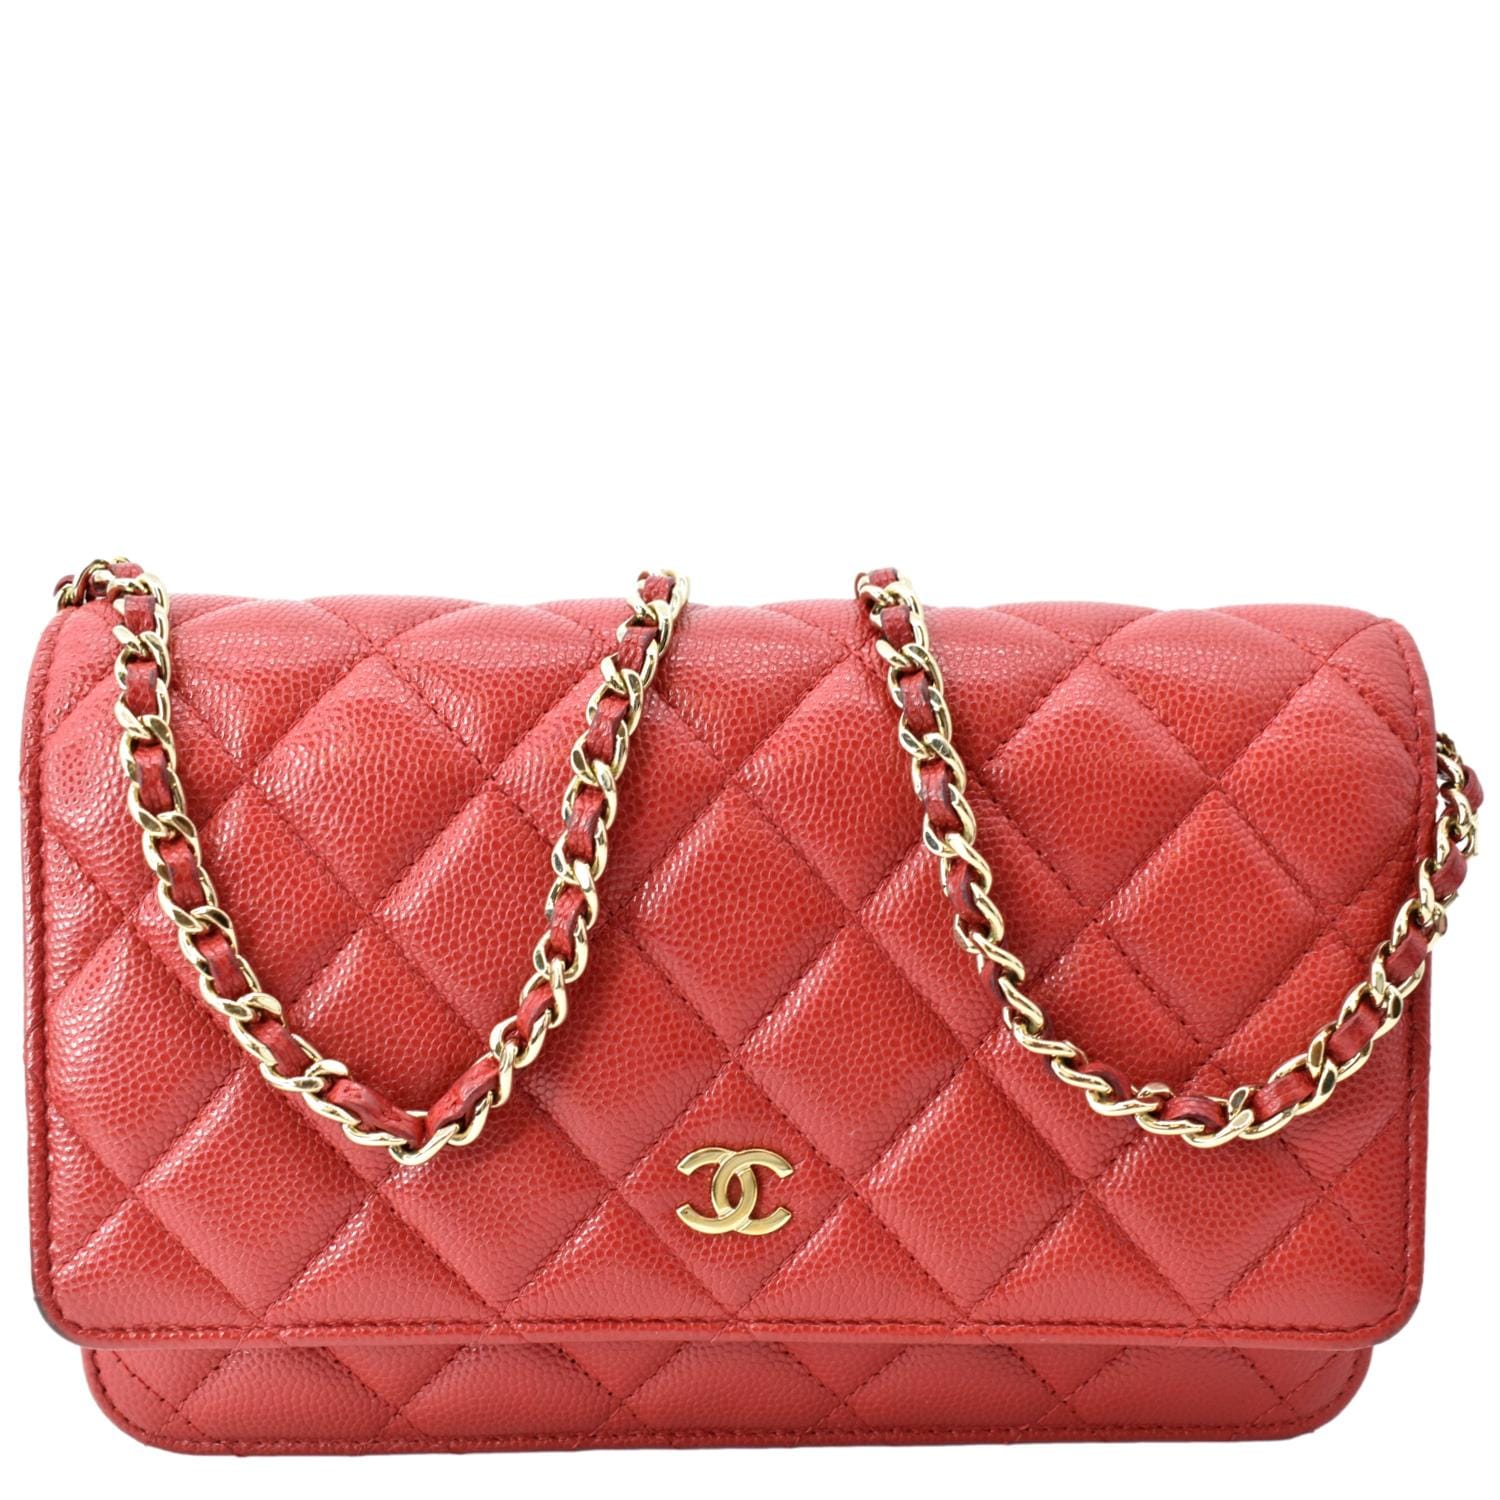 CHANEL Wallet Caviar Skin Red CC Auth am3885